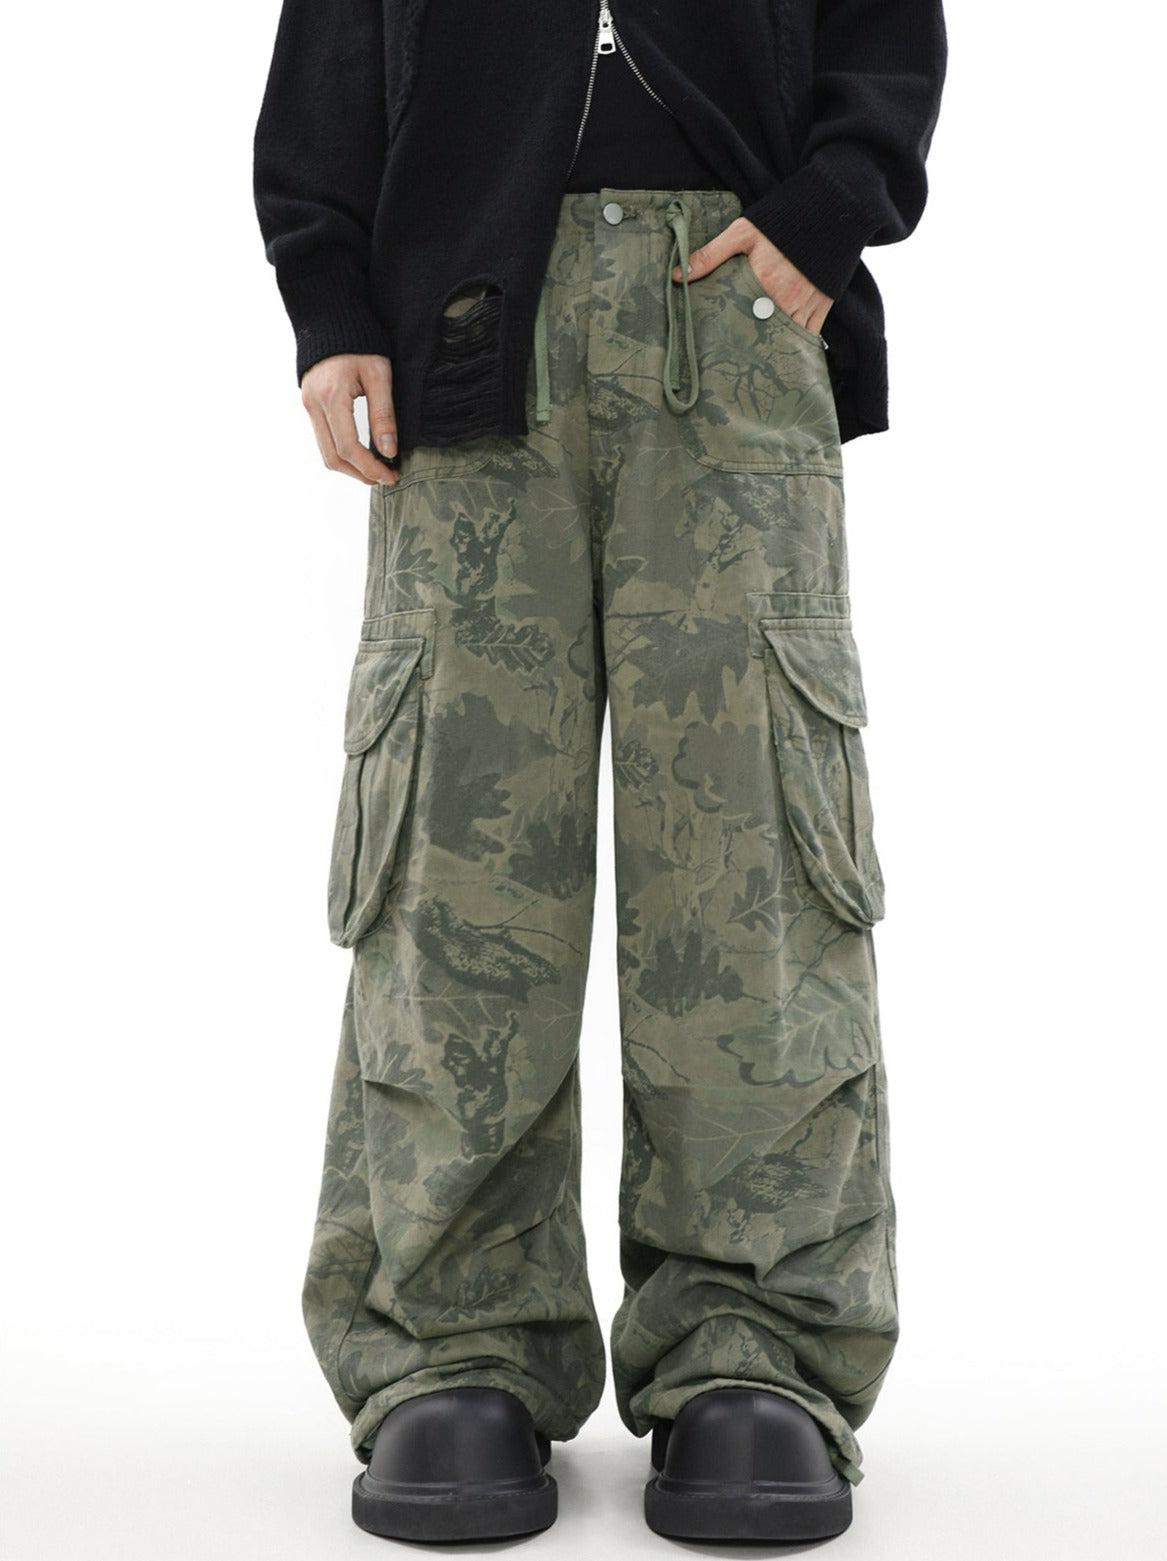 Mr Nearly Leaf Camouflage Drawstring Cargo Pants Korean Street Fashion Pants By Mr Nearly Shop Online at OH Vault